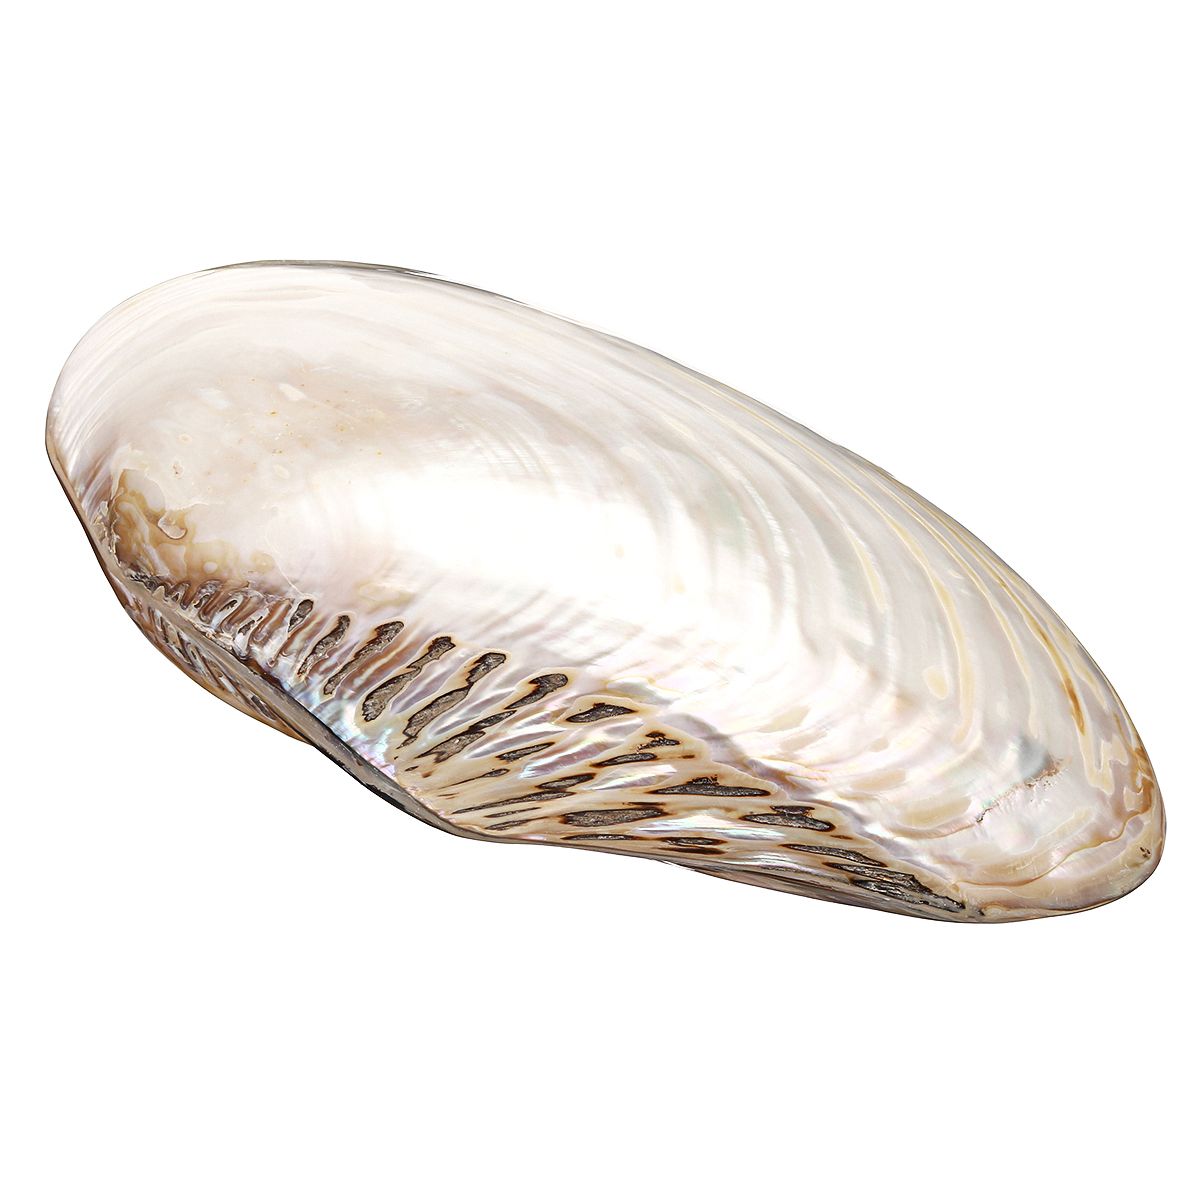 Natural-Conch-Shell-Coral-Pearl-Mussel-Clam-Double-sided-Large-Home-Tank-Decorations-26-28cm-1537943